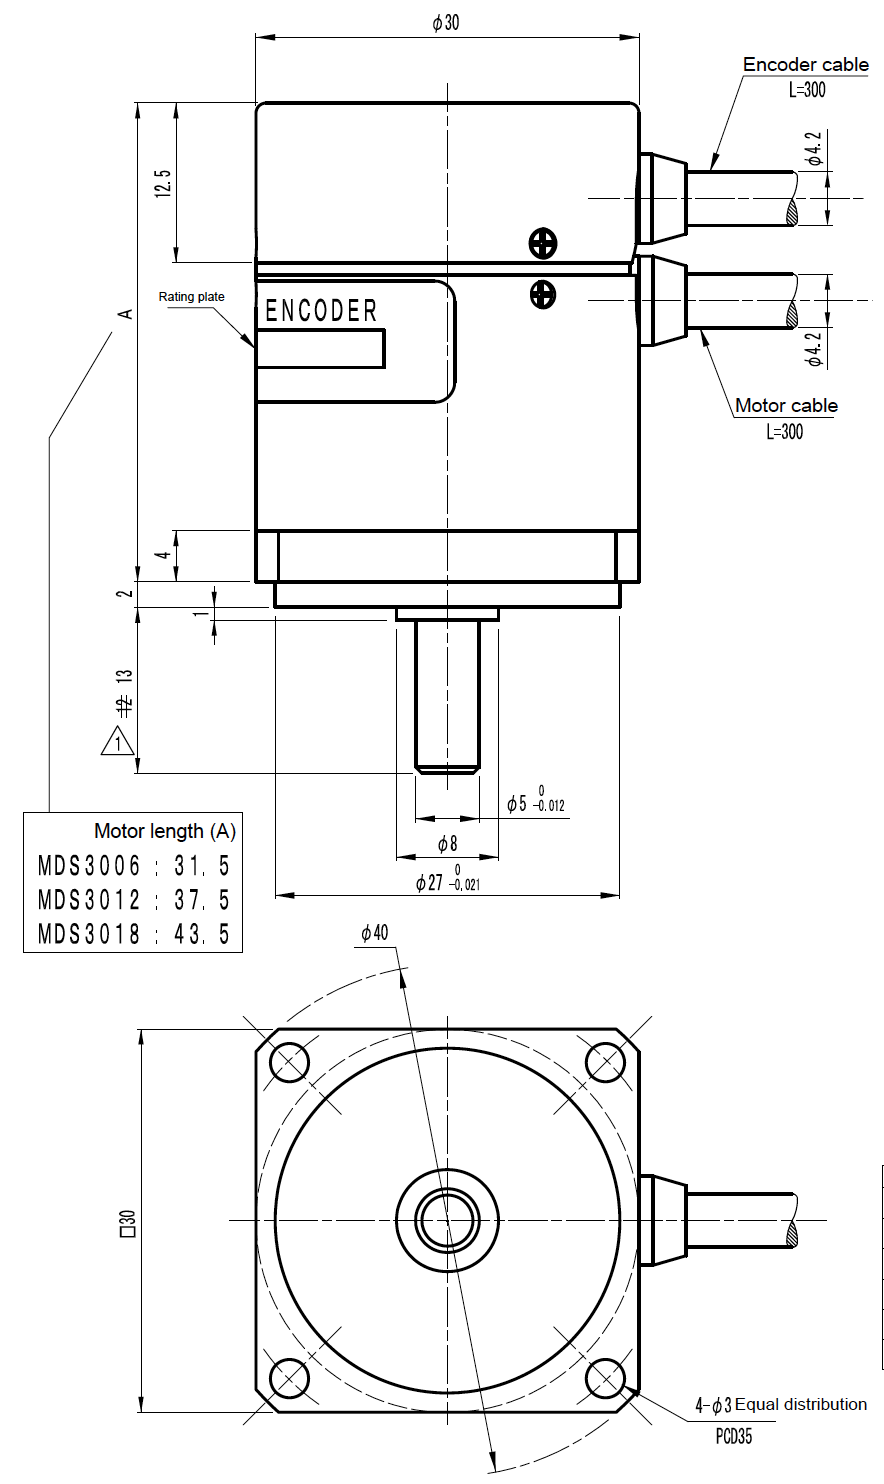 MDS-3018 system drawing